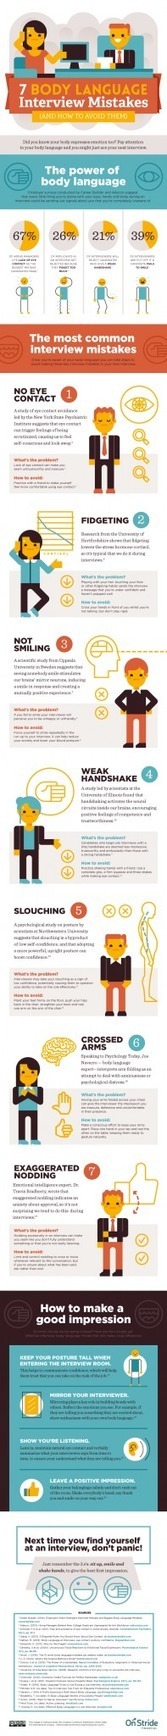 7 Body Language Job Interview Mistakes Infographic | #HR #RRHH Making love and making personal #branding #leadership | Scoop.it